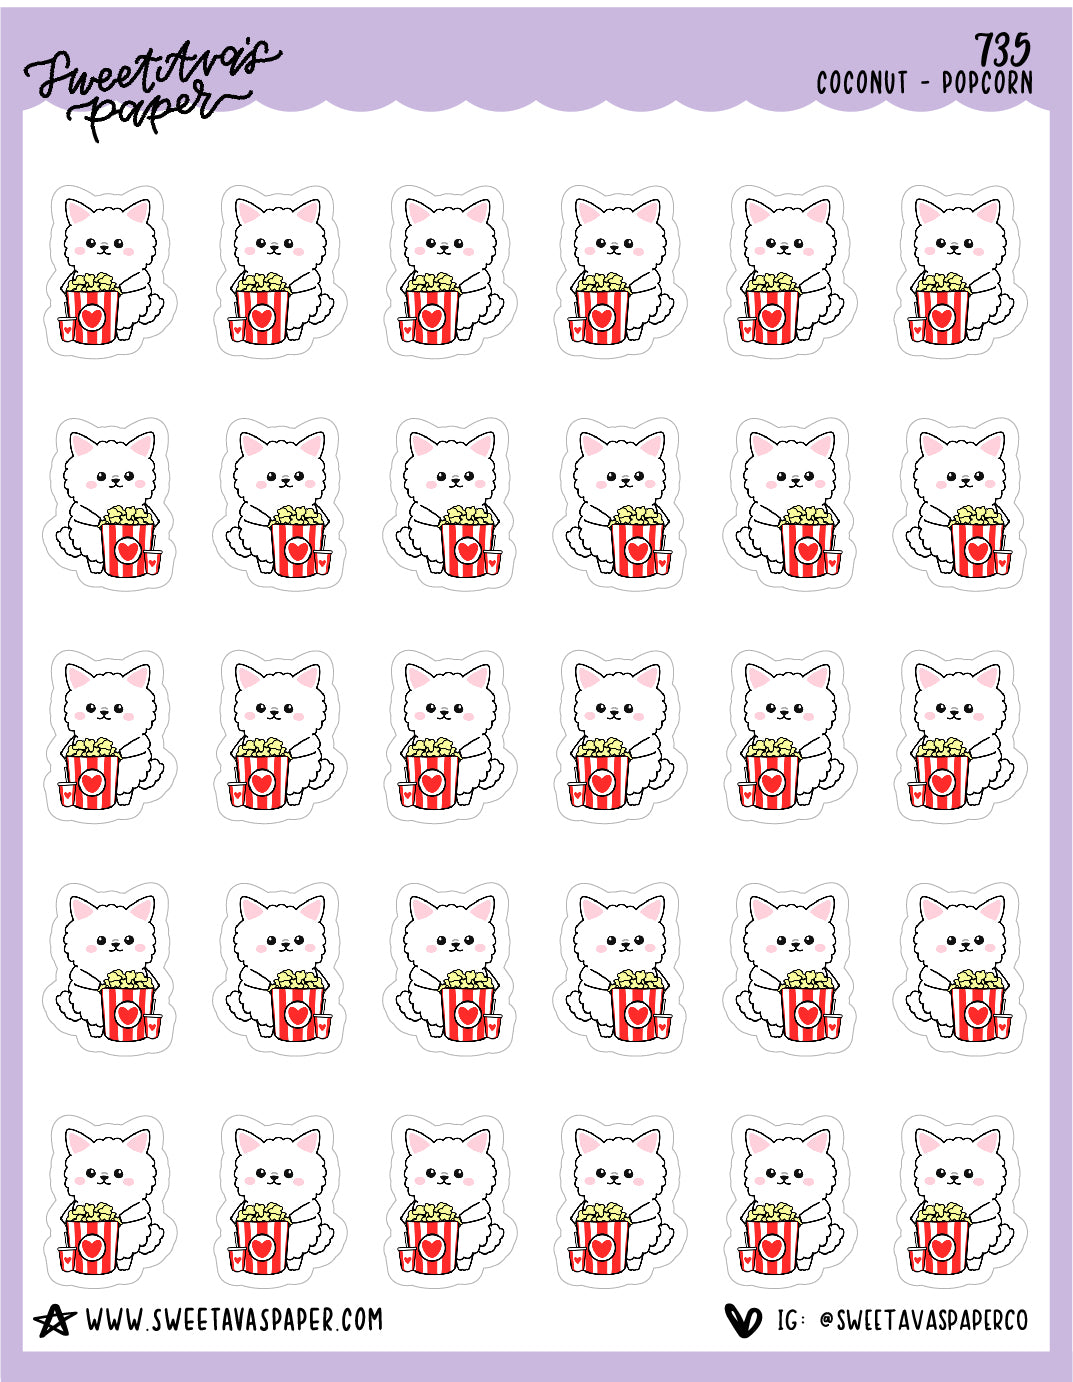 ICON SIZE - Popcorn Planner Stickers - Coconut the Puppy [735]